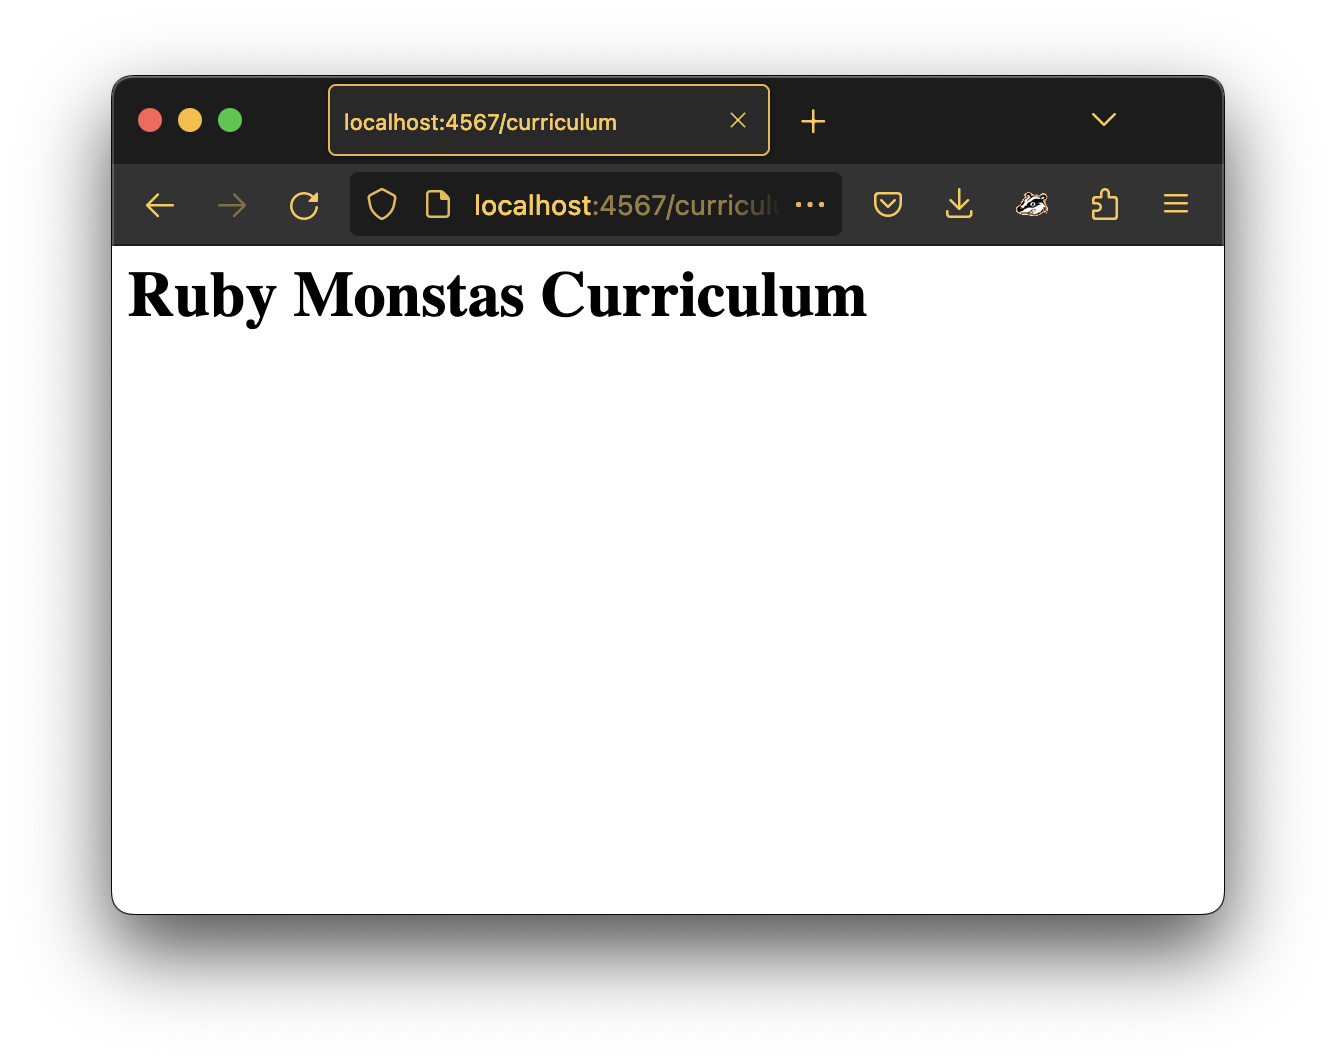 Screen shot of a browser window of the Sinatra application showing the title "Ruby Monstas Curriculum"